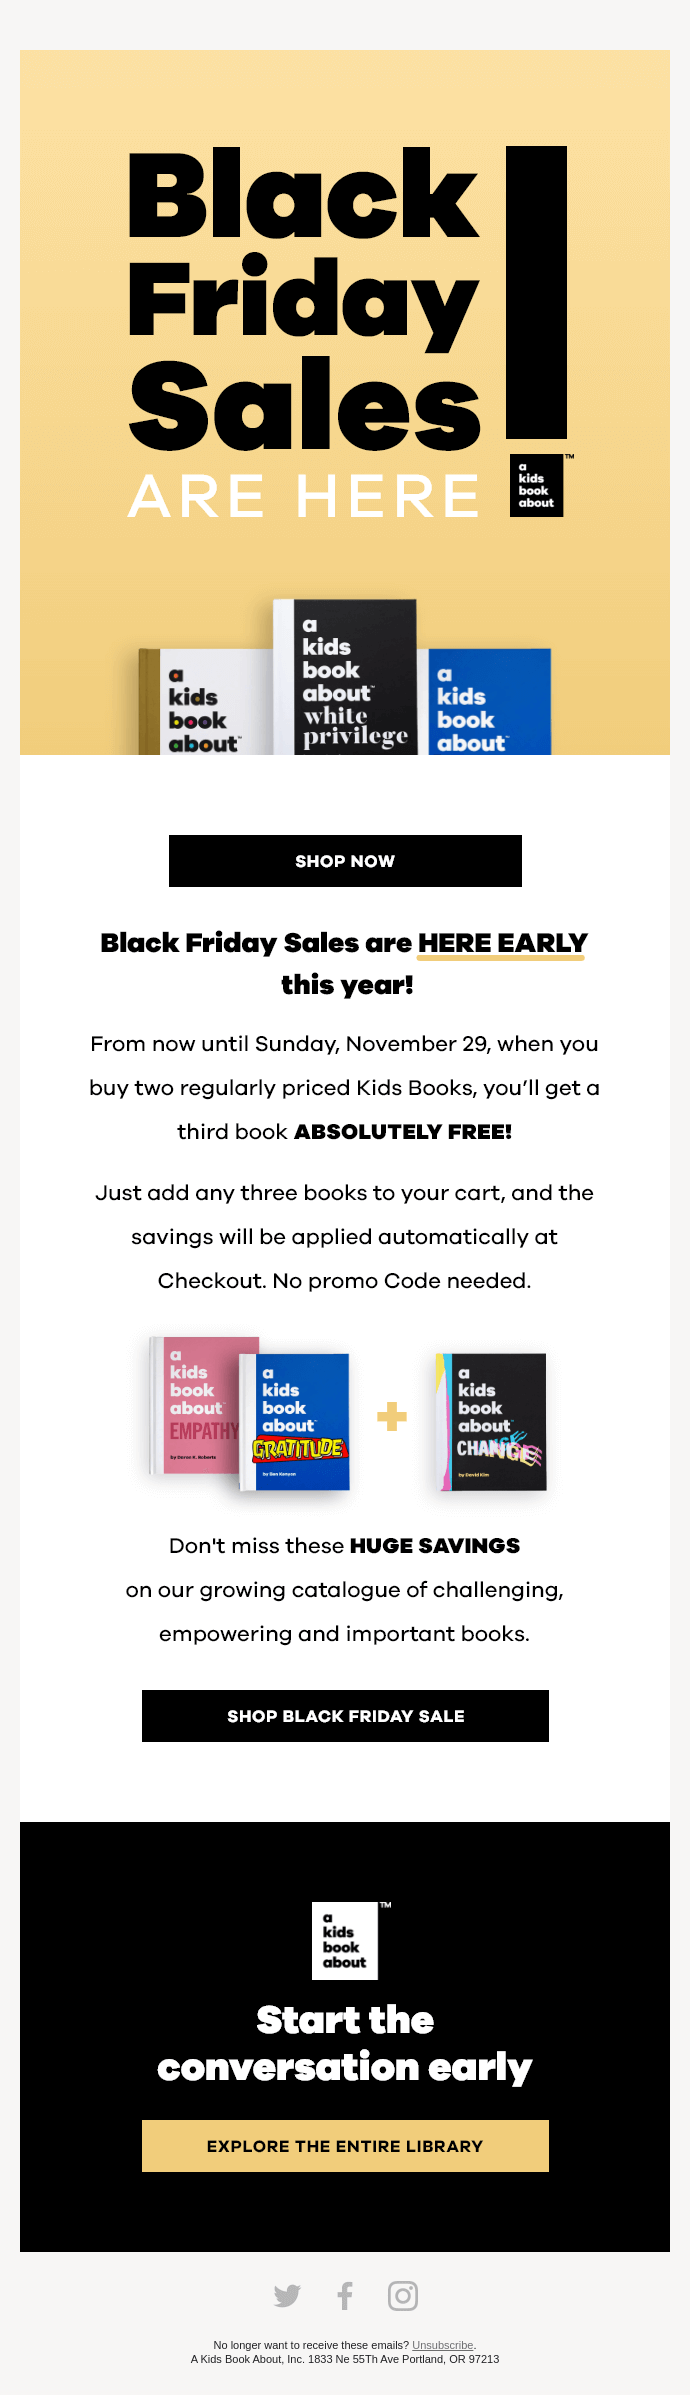 🎉 Black Friday Deals Came Early This Year!! 🎉